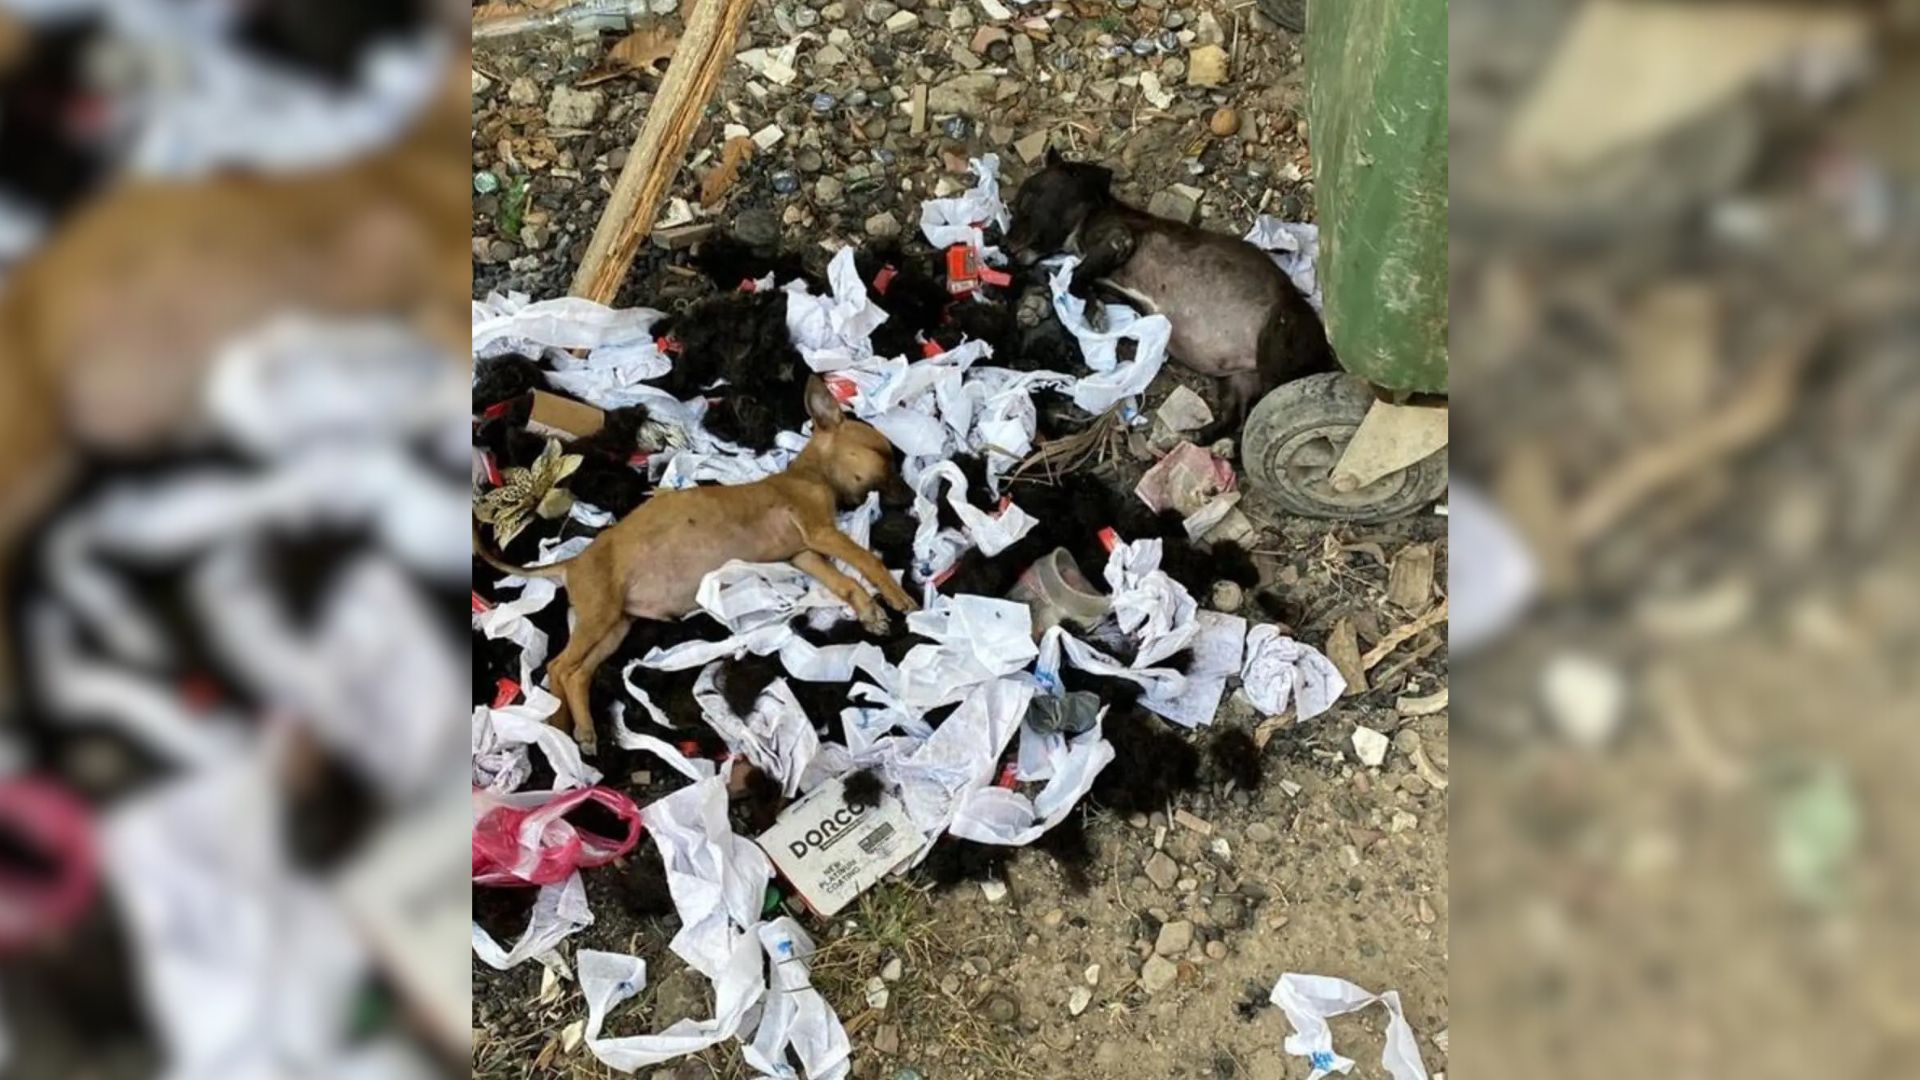 Rescuers Were Shocked To Find Two Puppies Sleeping On A Trash Pile So They Decided To Help